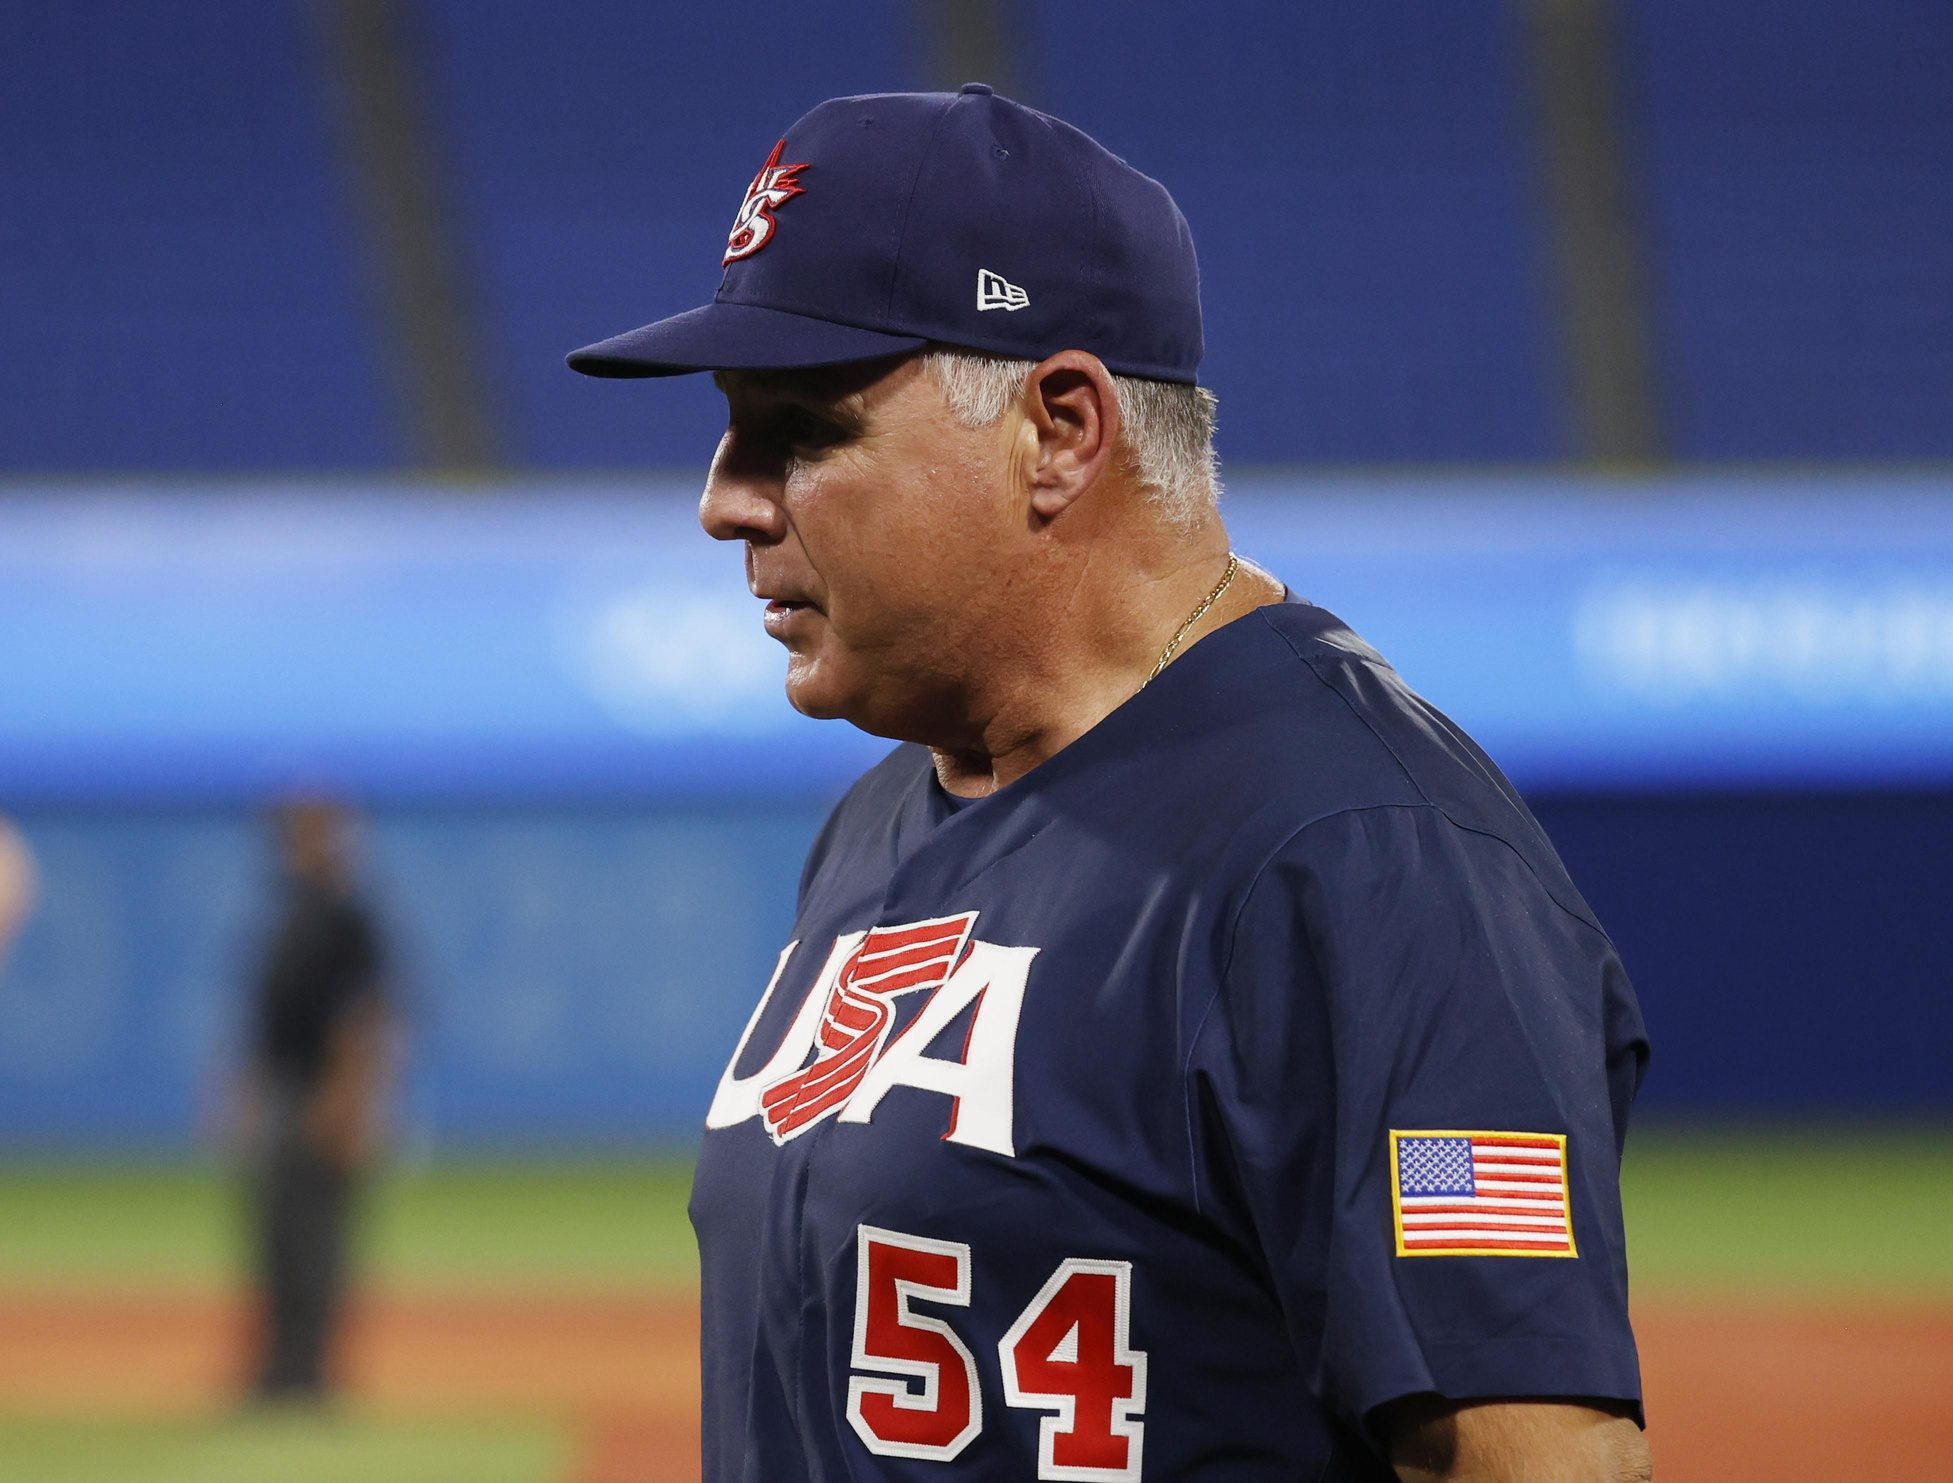 U.S. Olympic baseball team manager Mike Scioscia says roster fluid